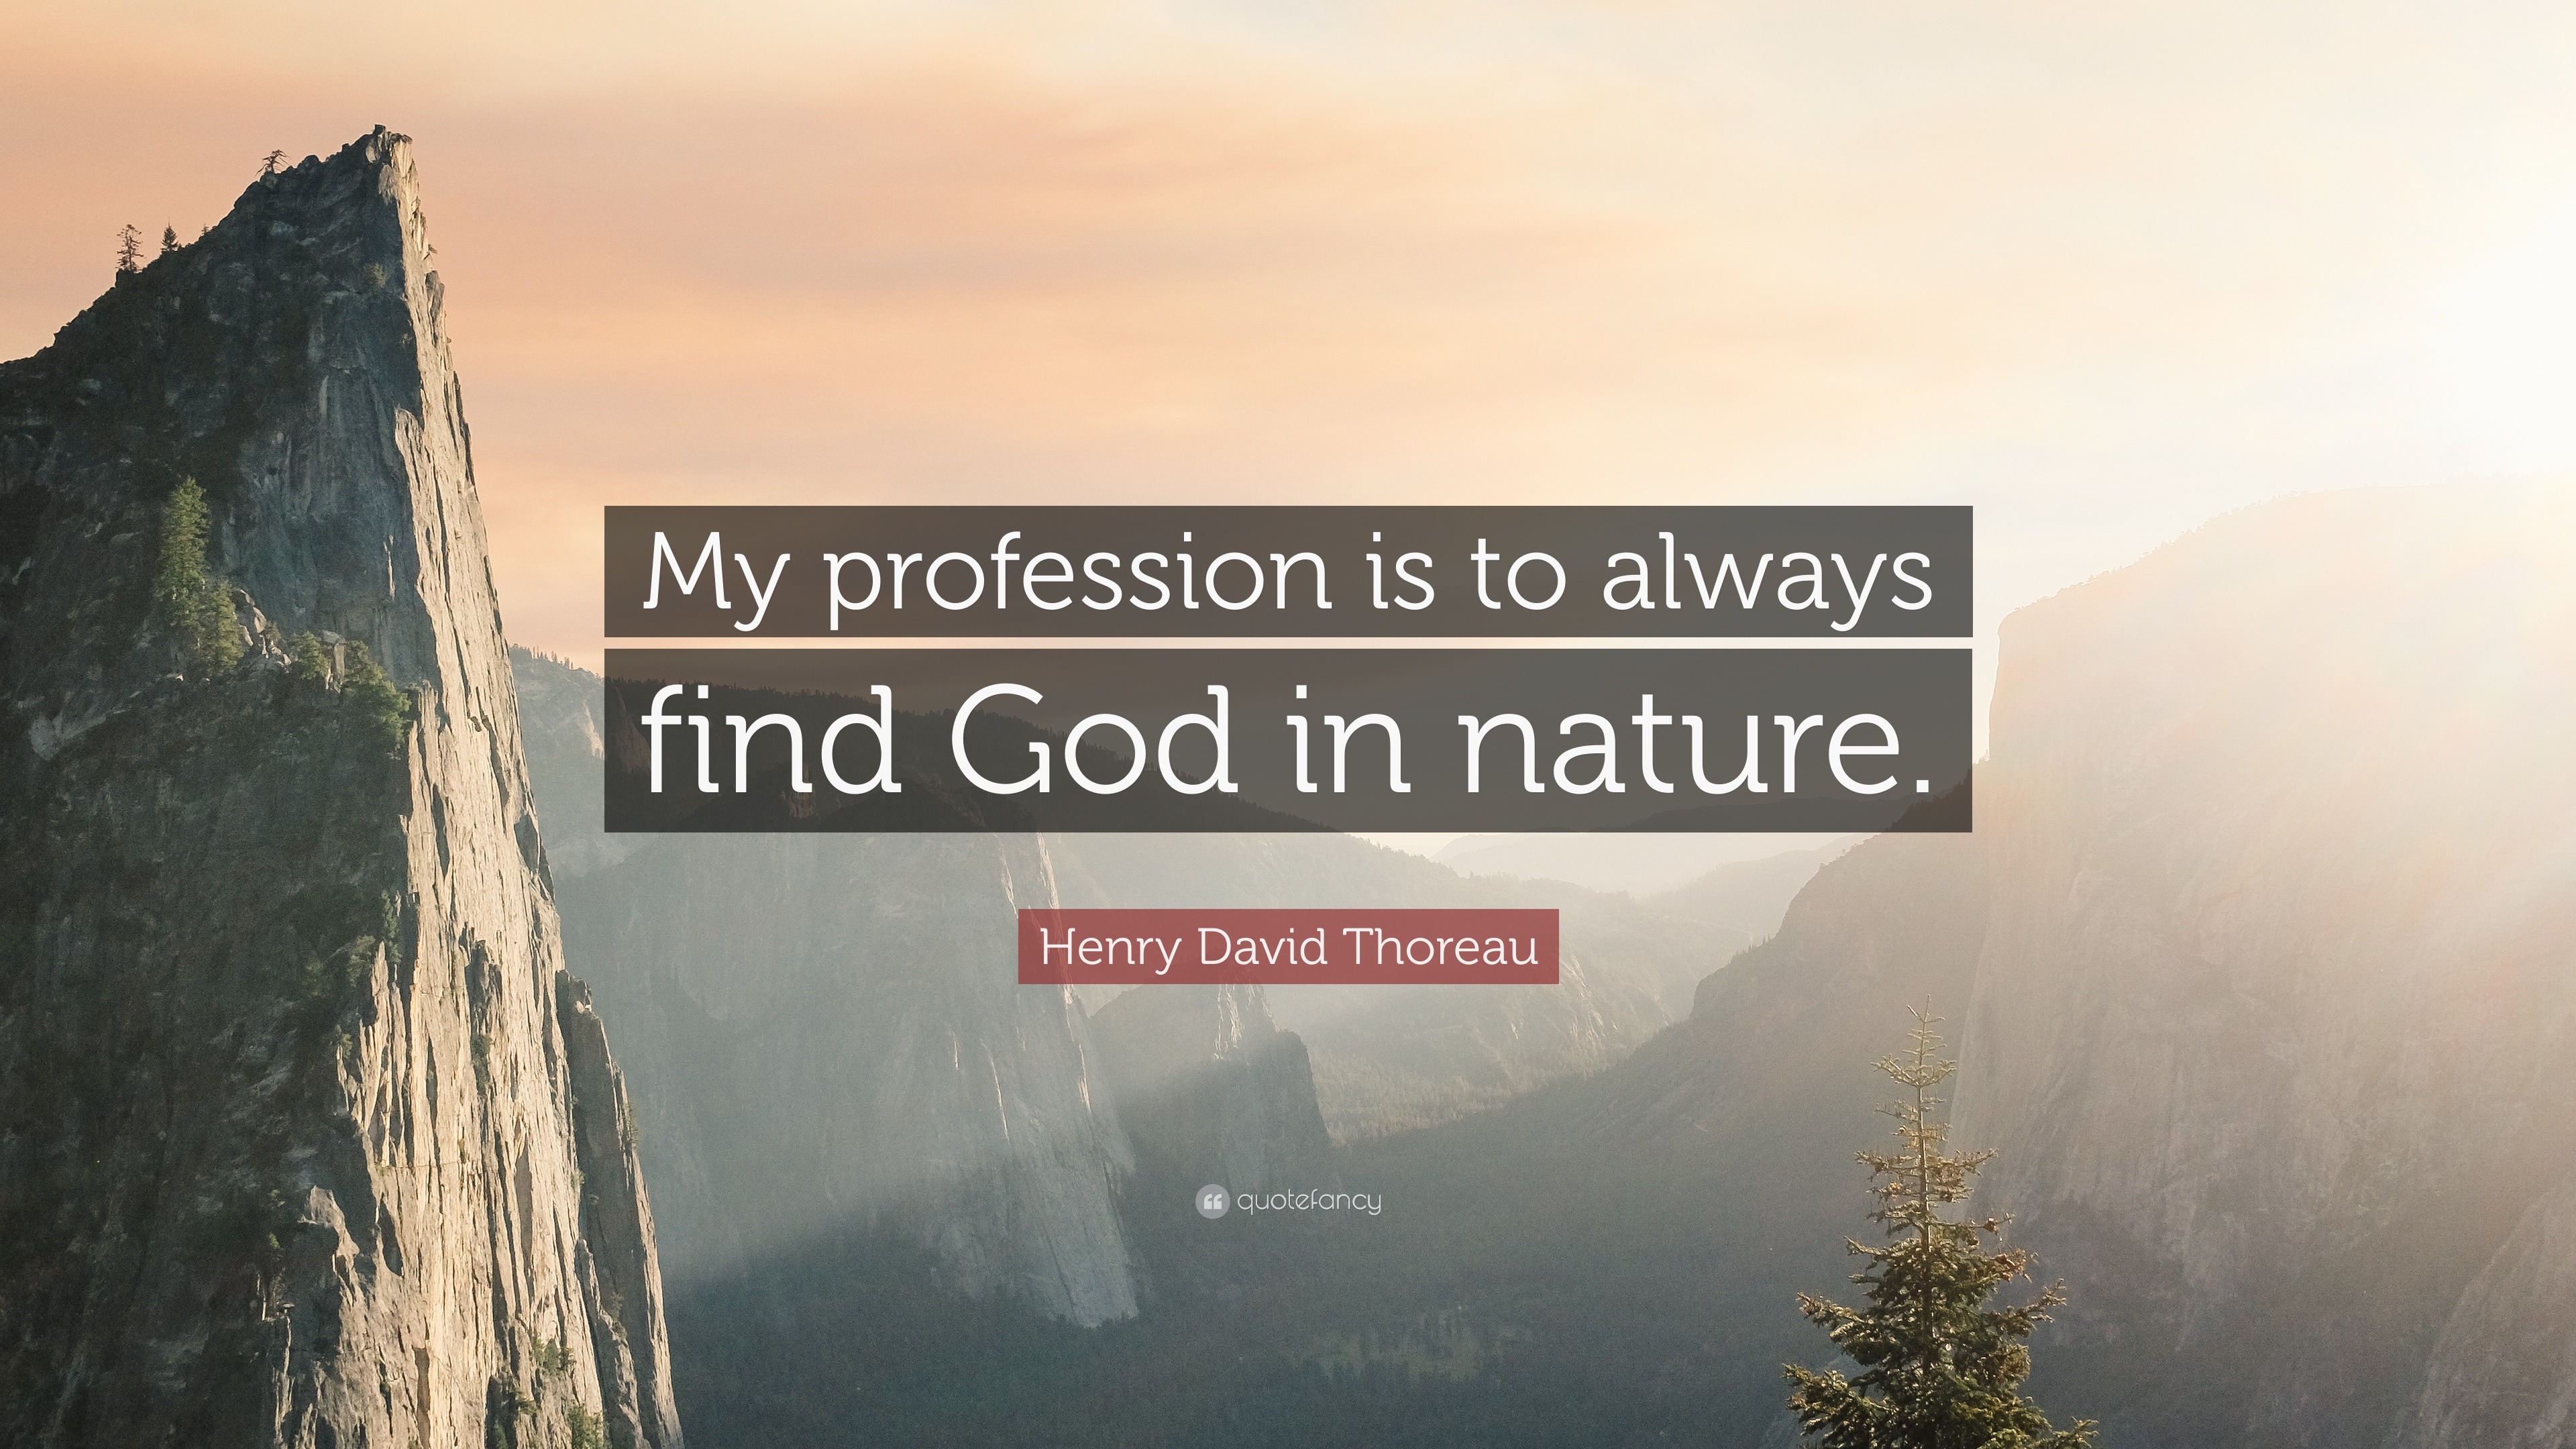 jeans bedstemor Inca Empire Henry David Thoreau Quote: “My profession is to always find God in nature.”